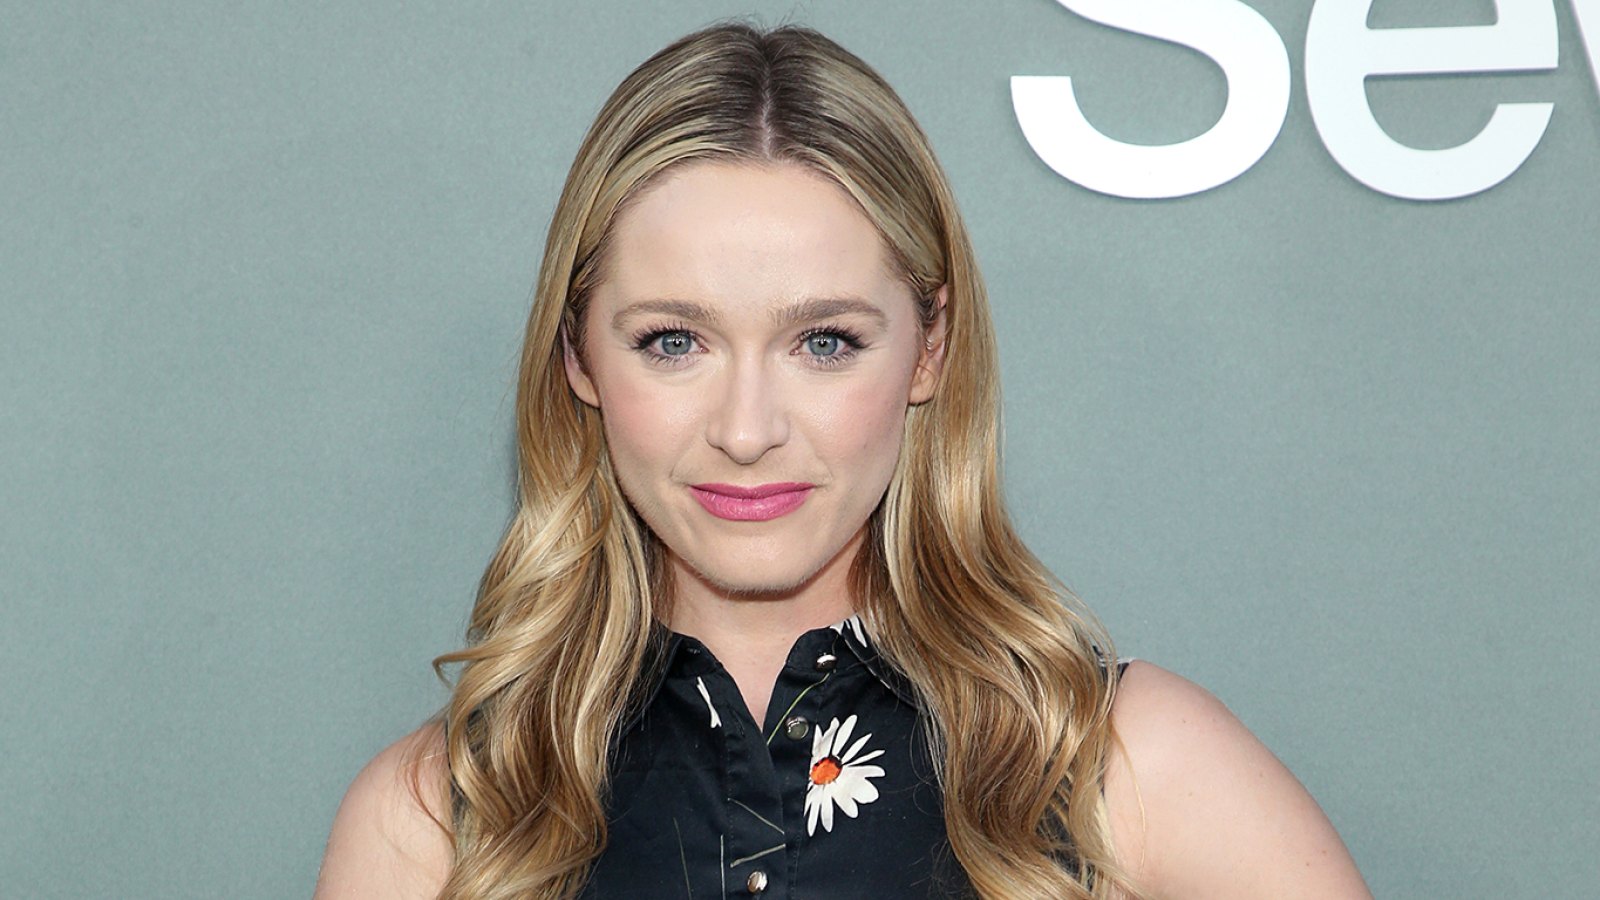 Awkward's Greer Grammer Says Recent $.81 Residuals 'Are Better Than Most' She's Gotten — For 1 Cent!